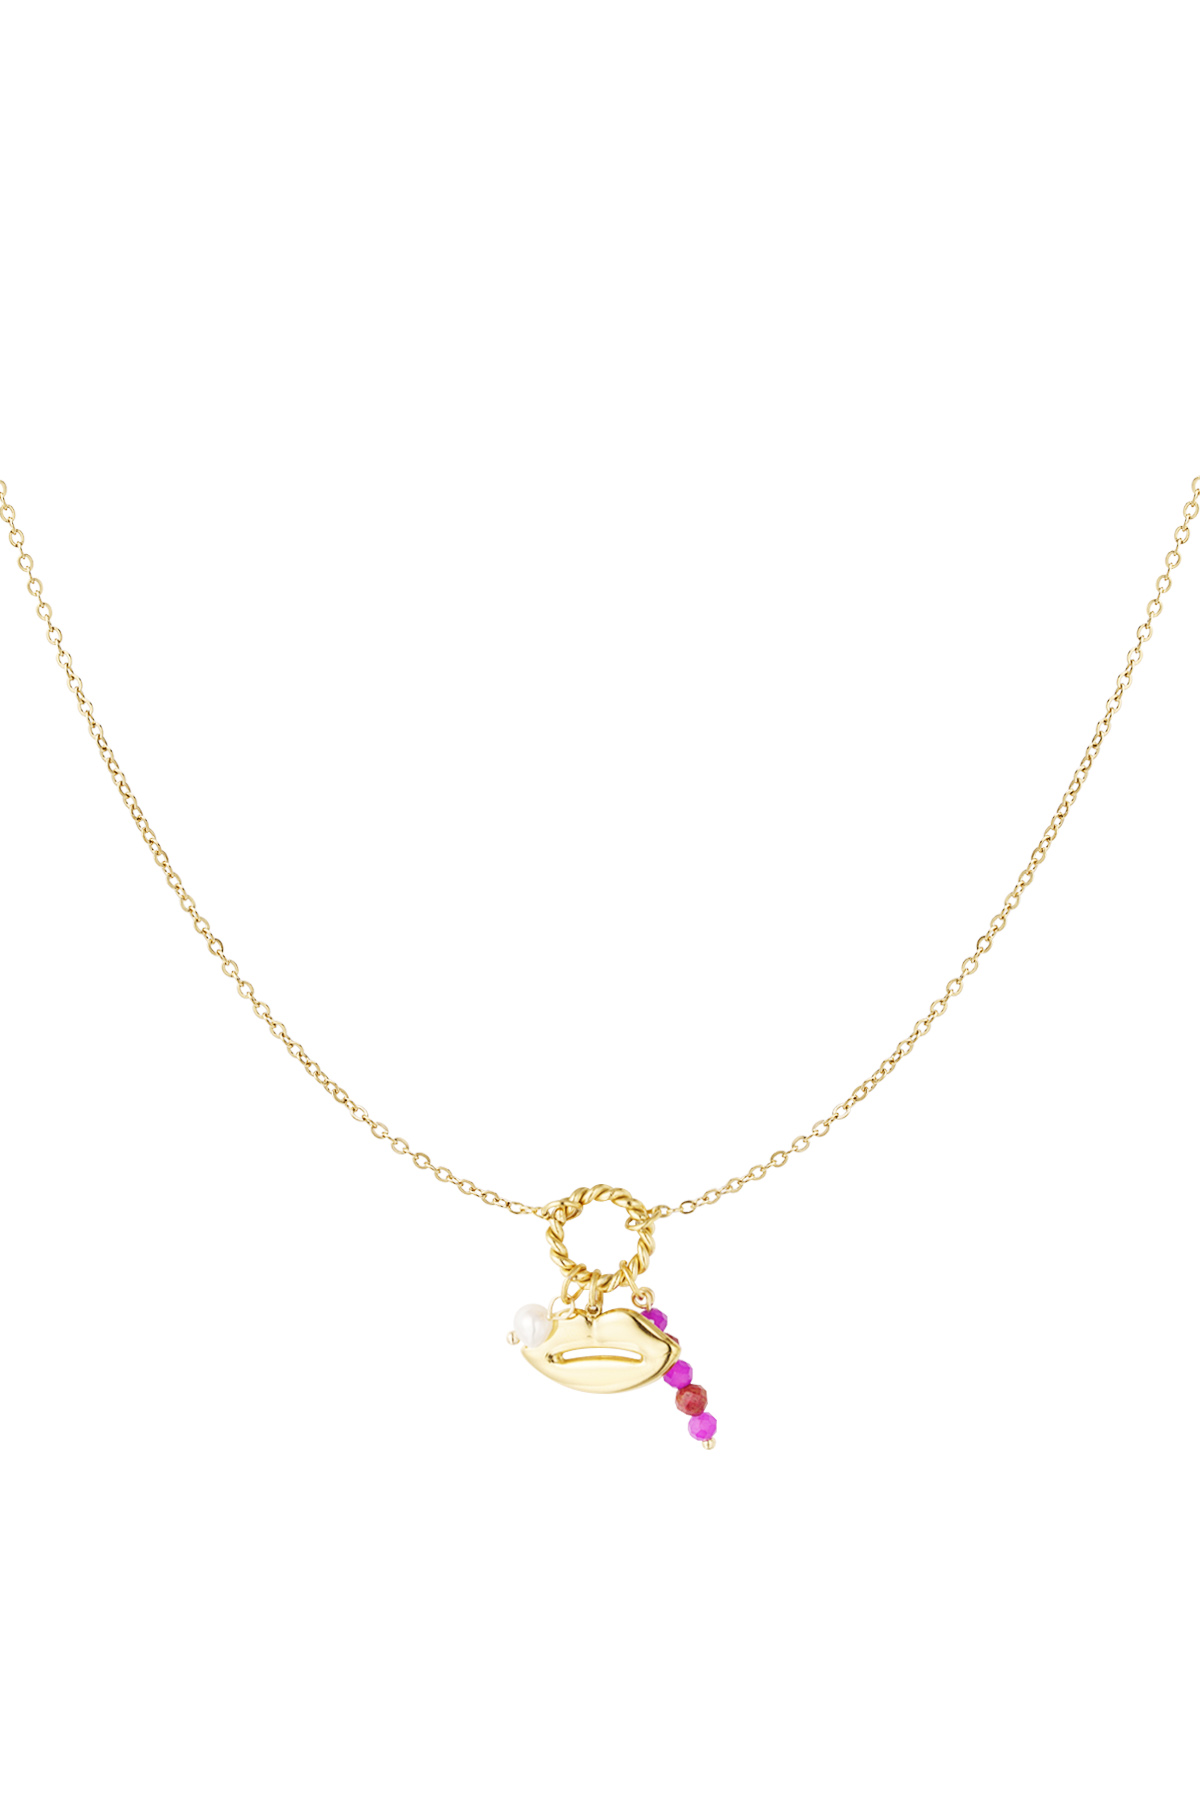 Necklace mouth with beads - gold/pink h5 